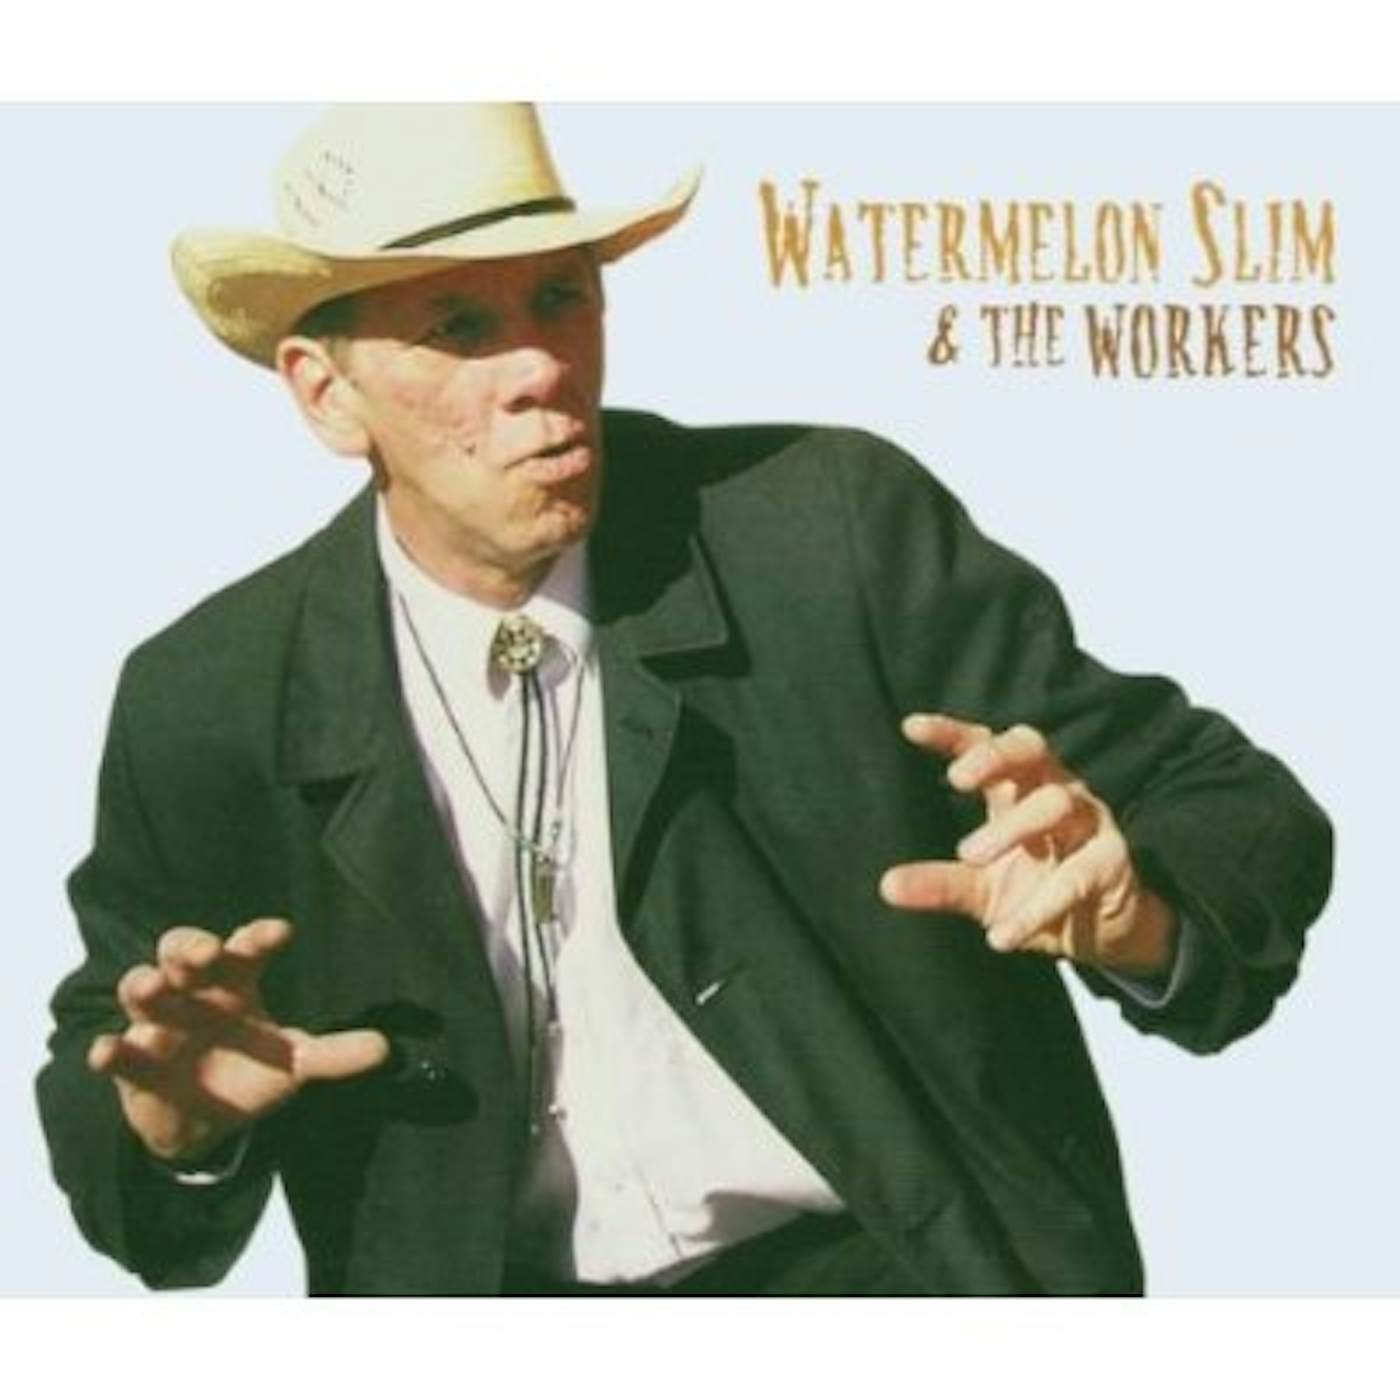 WATERMELON SLIM & THE WORKERS CD